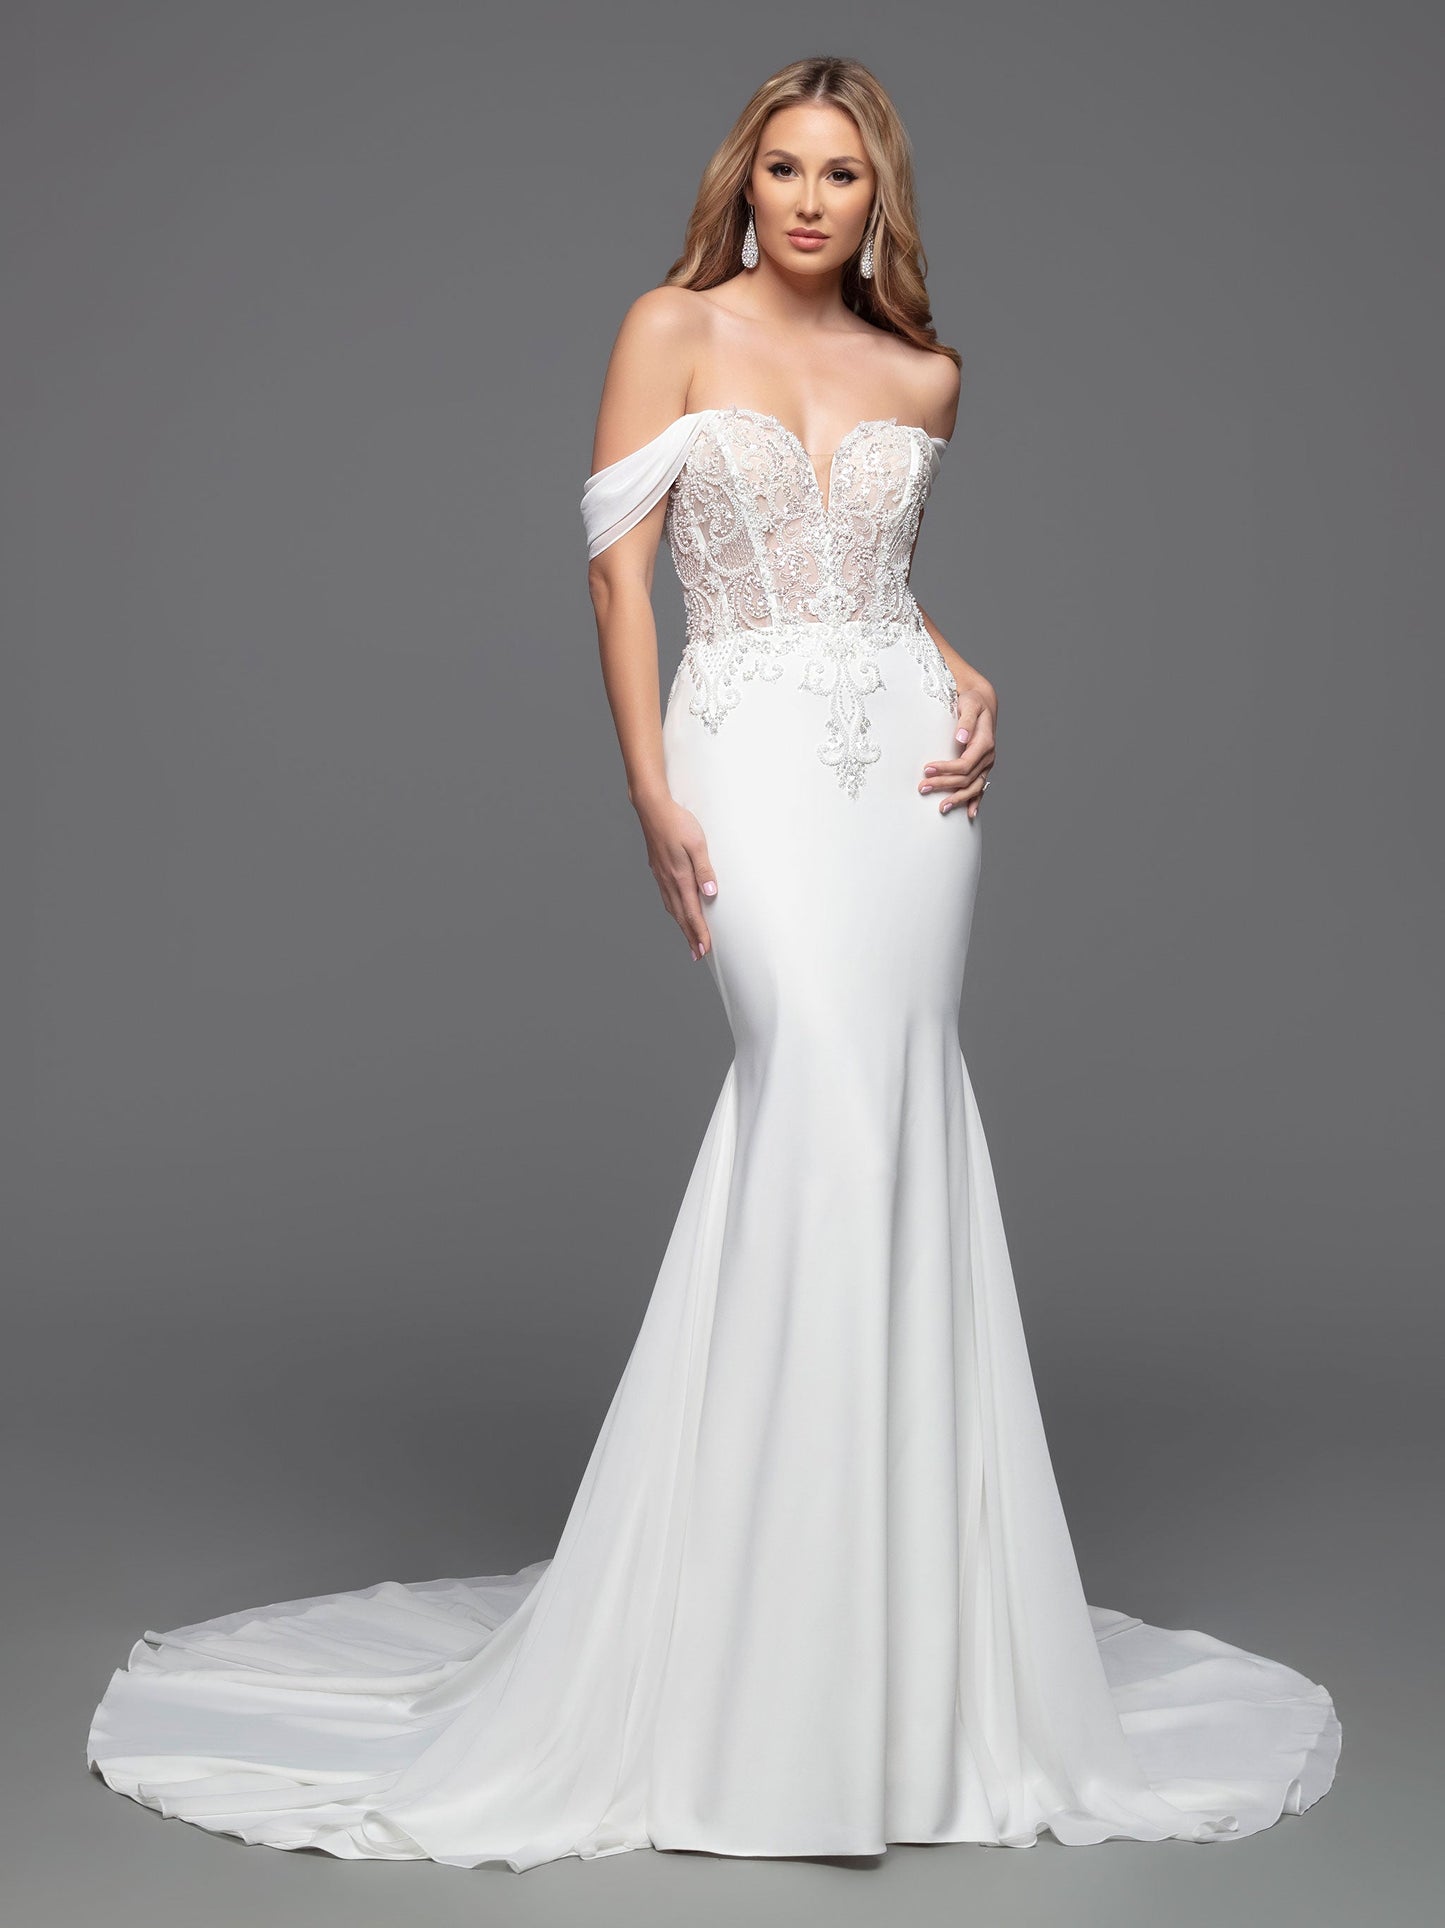 This Davinci Bridal 50803 Sheer Beaded Bodice wedding dress is a timeless choice for your special day. An elegant fit & flare silhouette with a corseted back, beaded appliques, and soft off-the-shoulder straps that flatter the neck and shoulders. The simple crepe skirt completes the classic look.  Sizes: 2-20  Colors: Ivory 